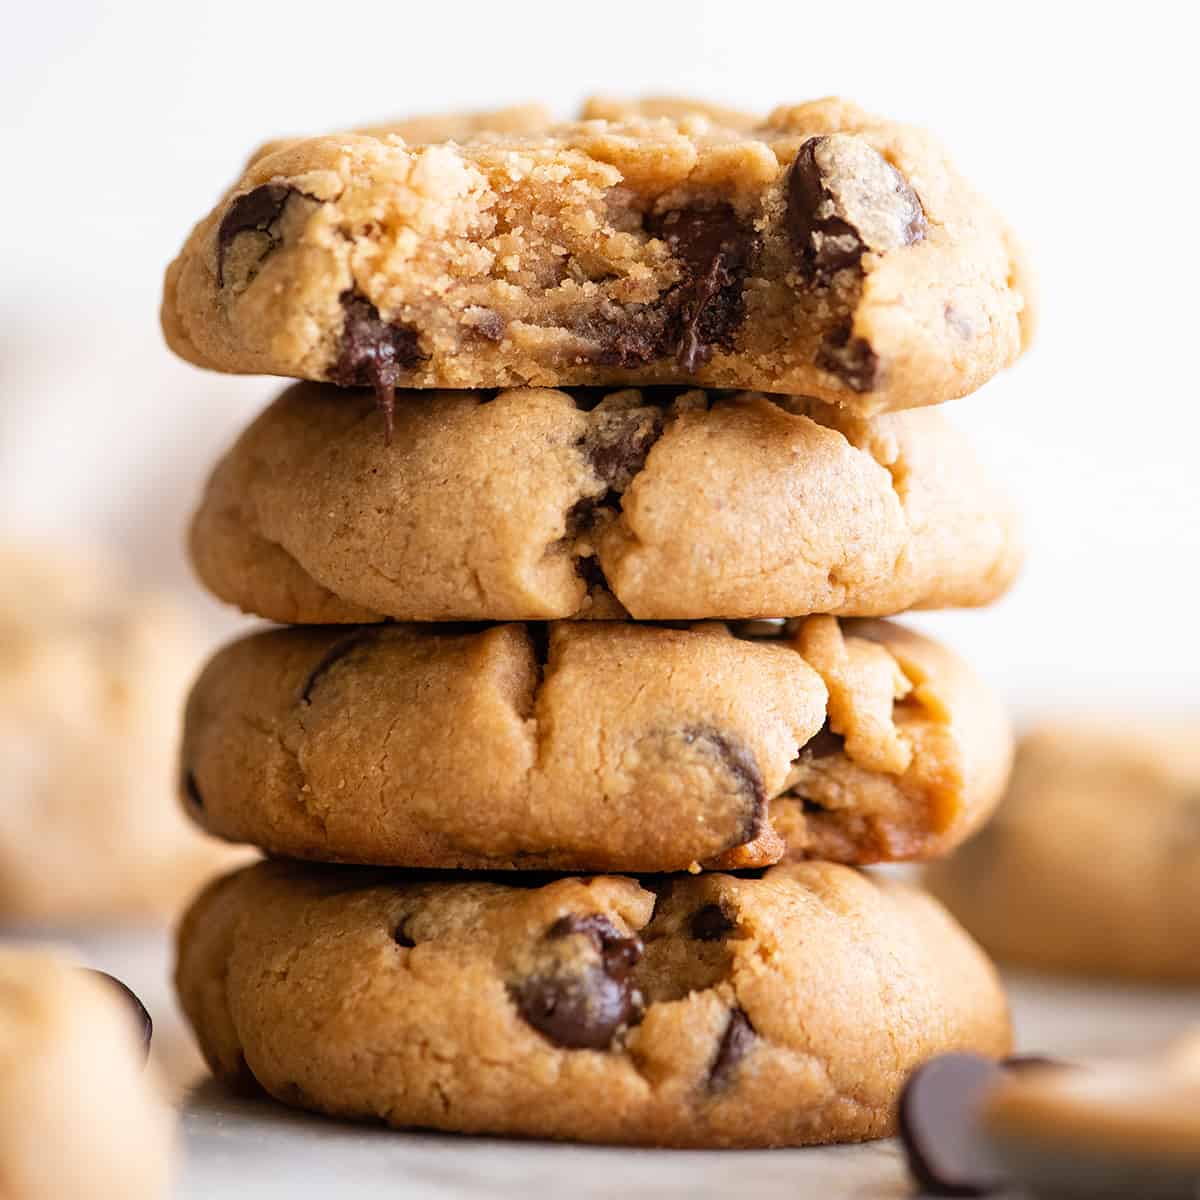 a stack of 4 Peanut Butter Chocolate Chip Cookies, the top one has a bite taken out of it